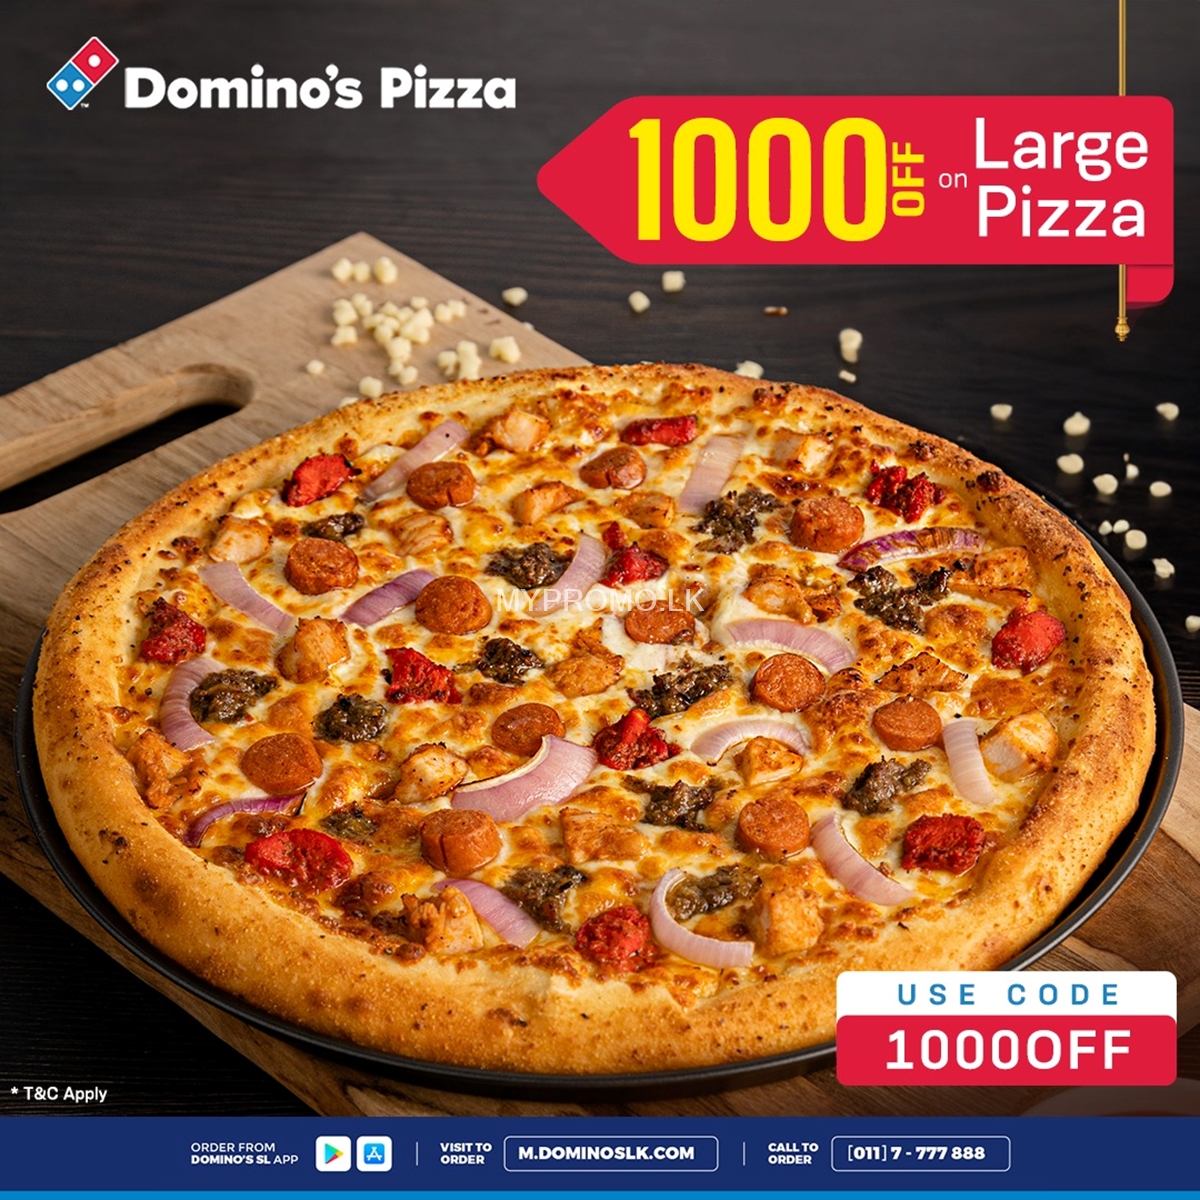 Enjoy Rs 1000 OFF on Large Pizza from Domino's Pizza 